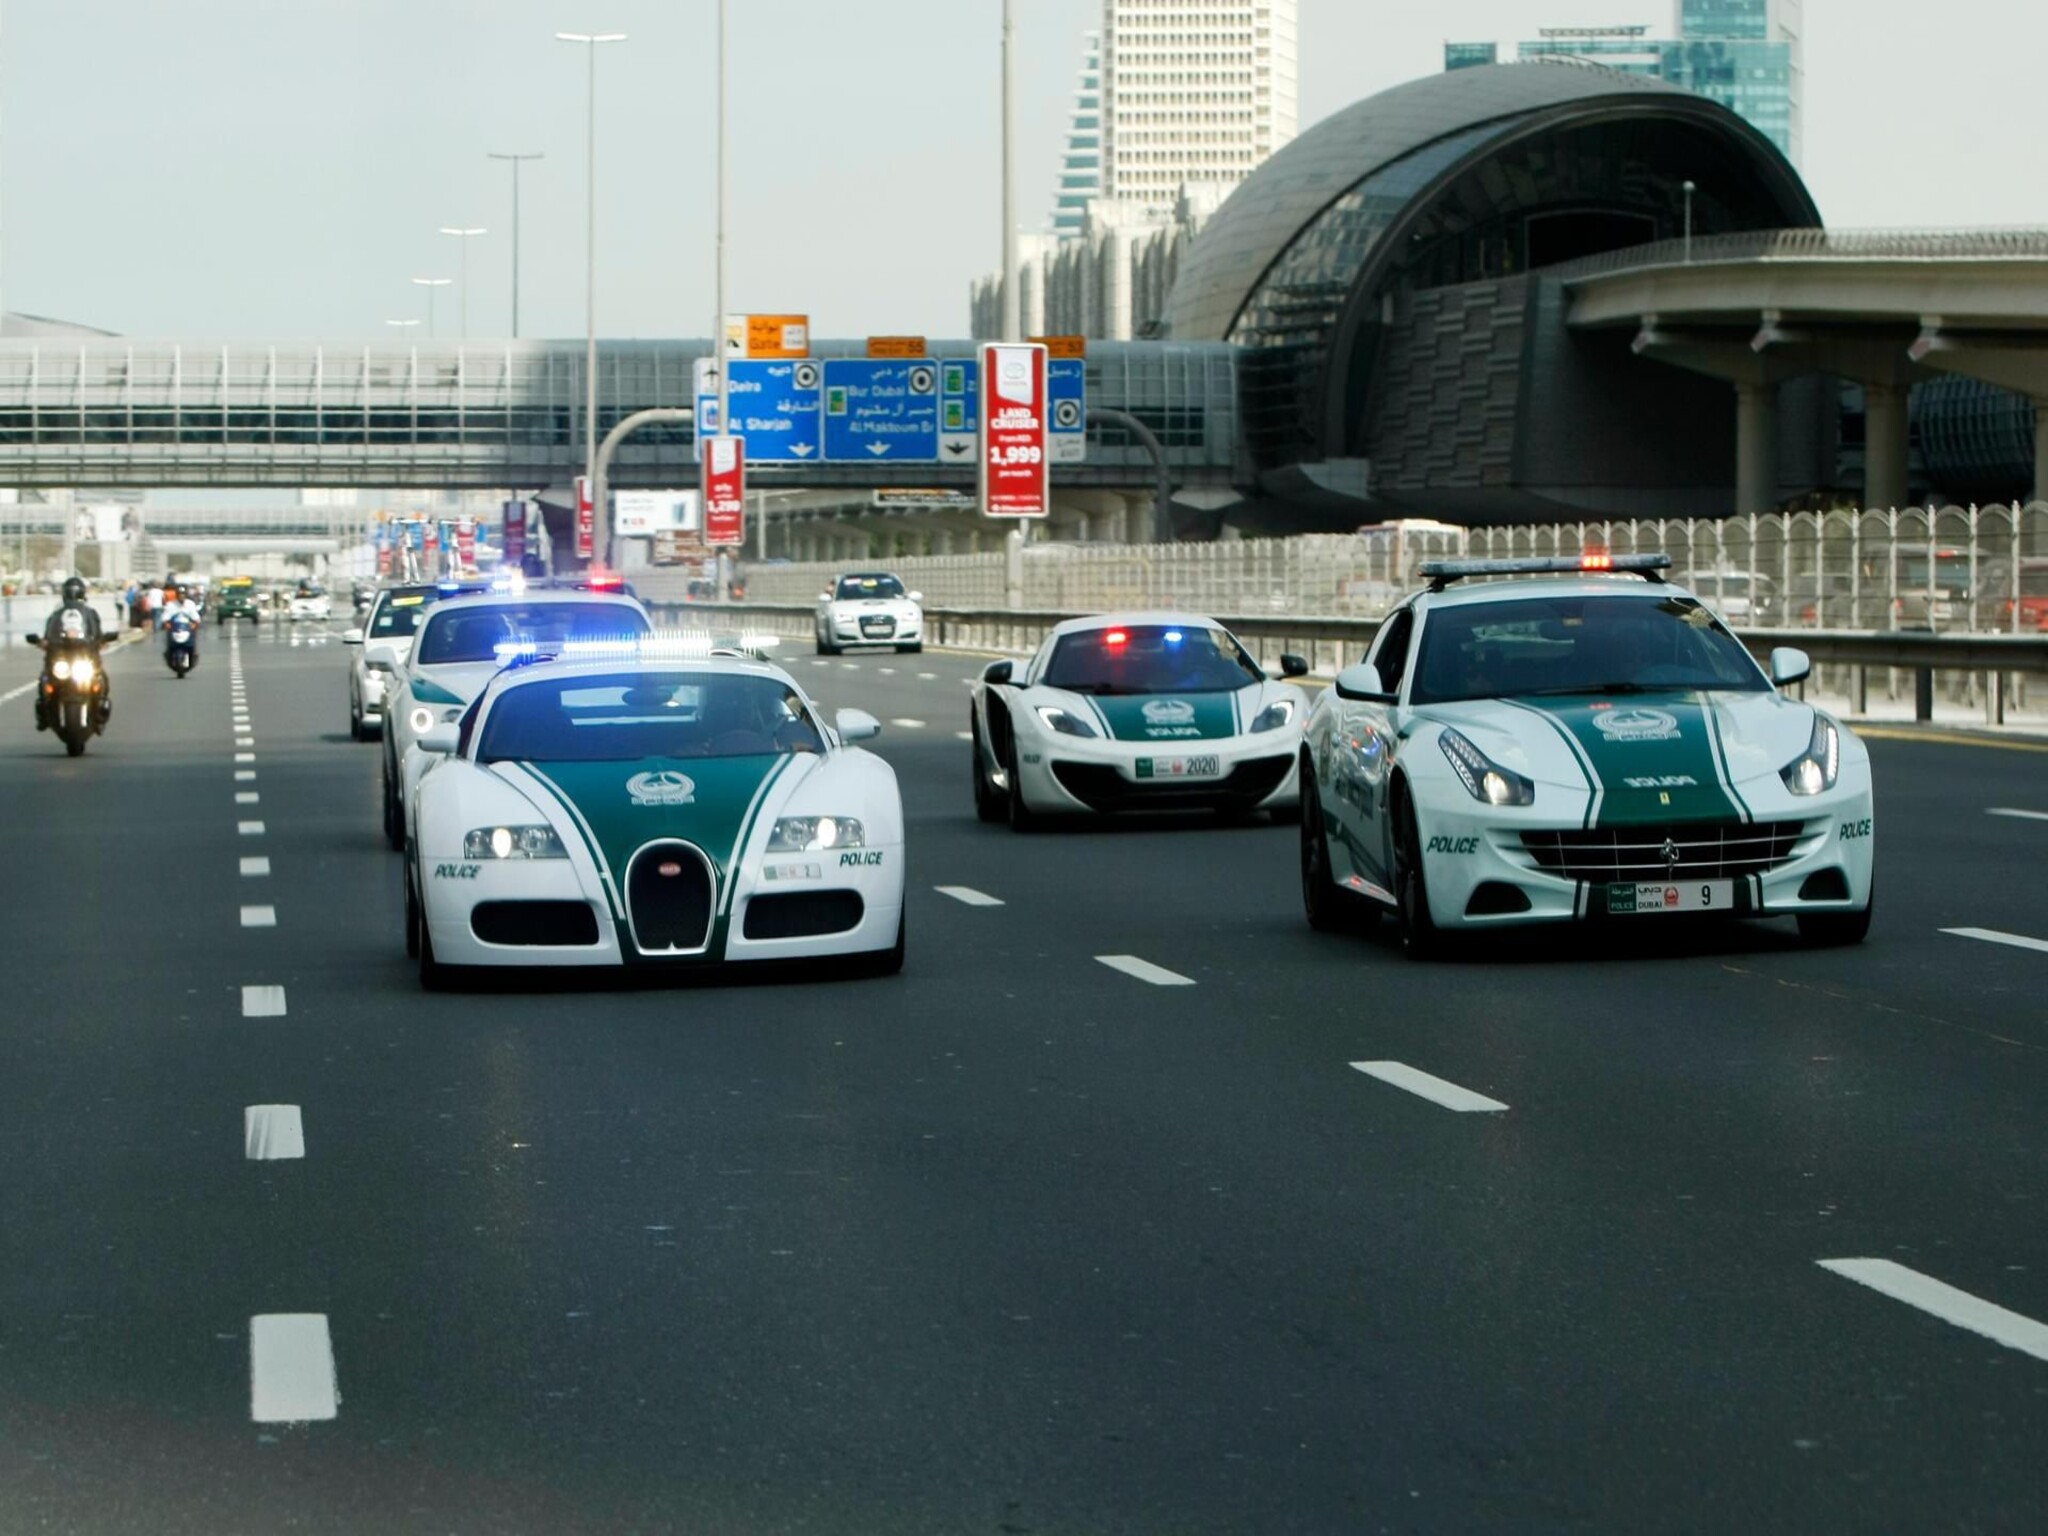 The UAE Police warns all drivers of the penalty for some prohibited driving behavior